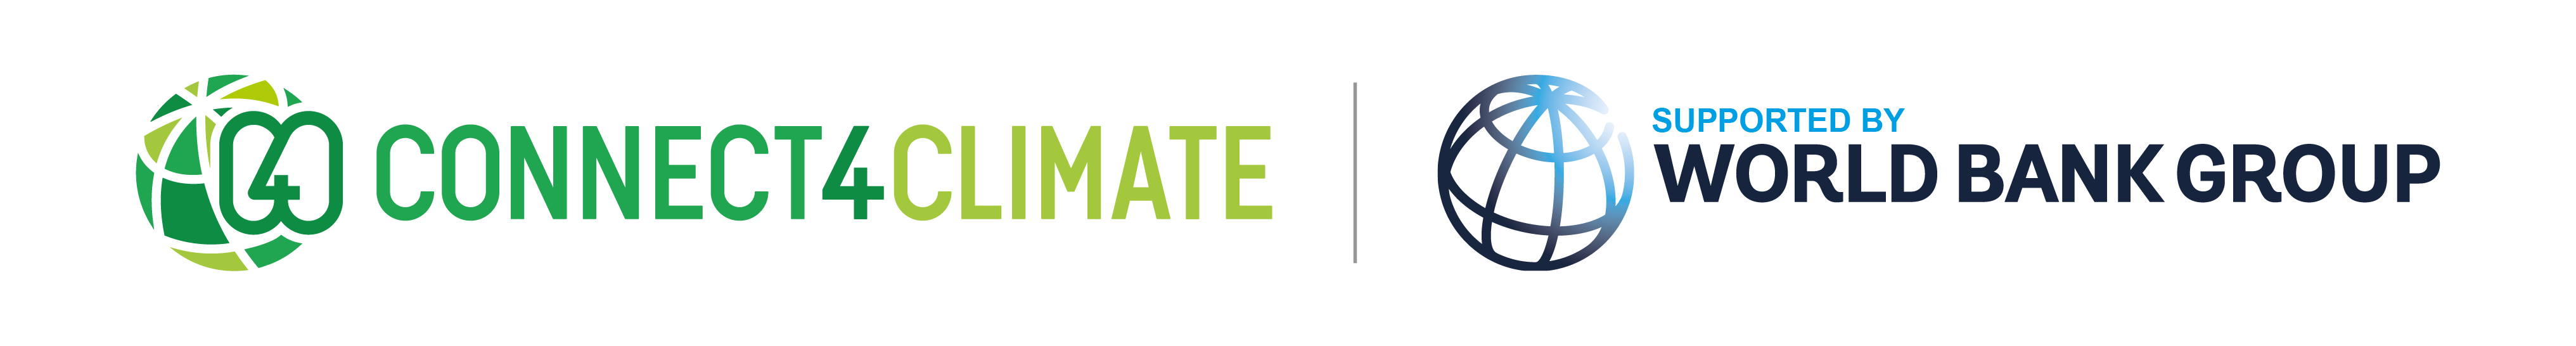 Connect4Climate Logo (Supported by the World Bank Group)